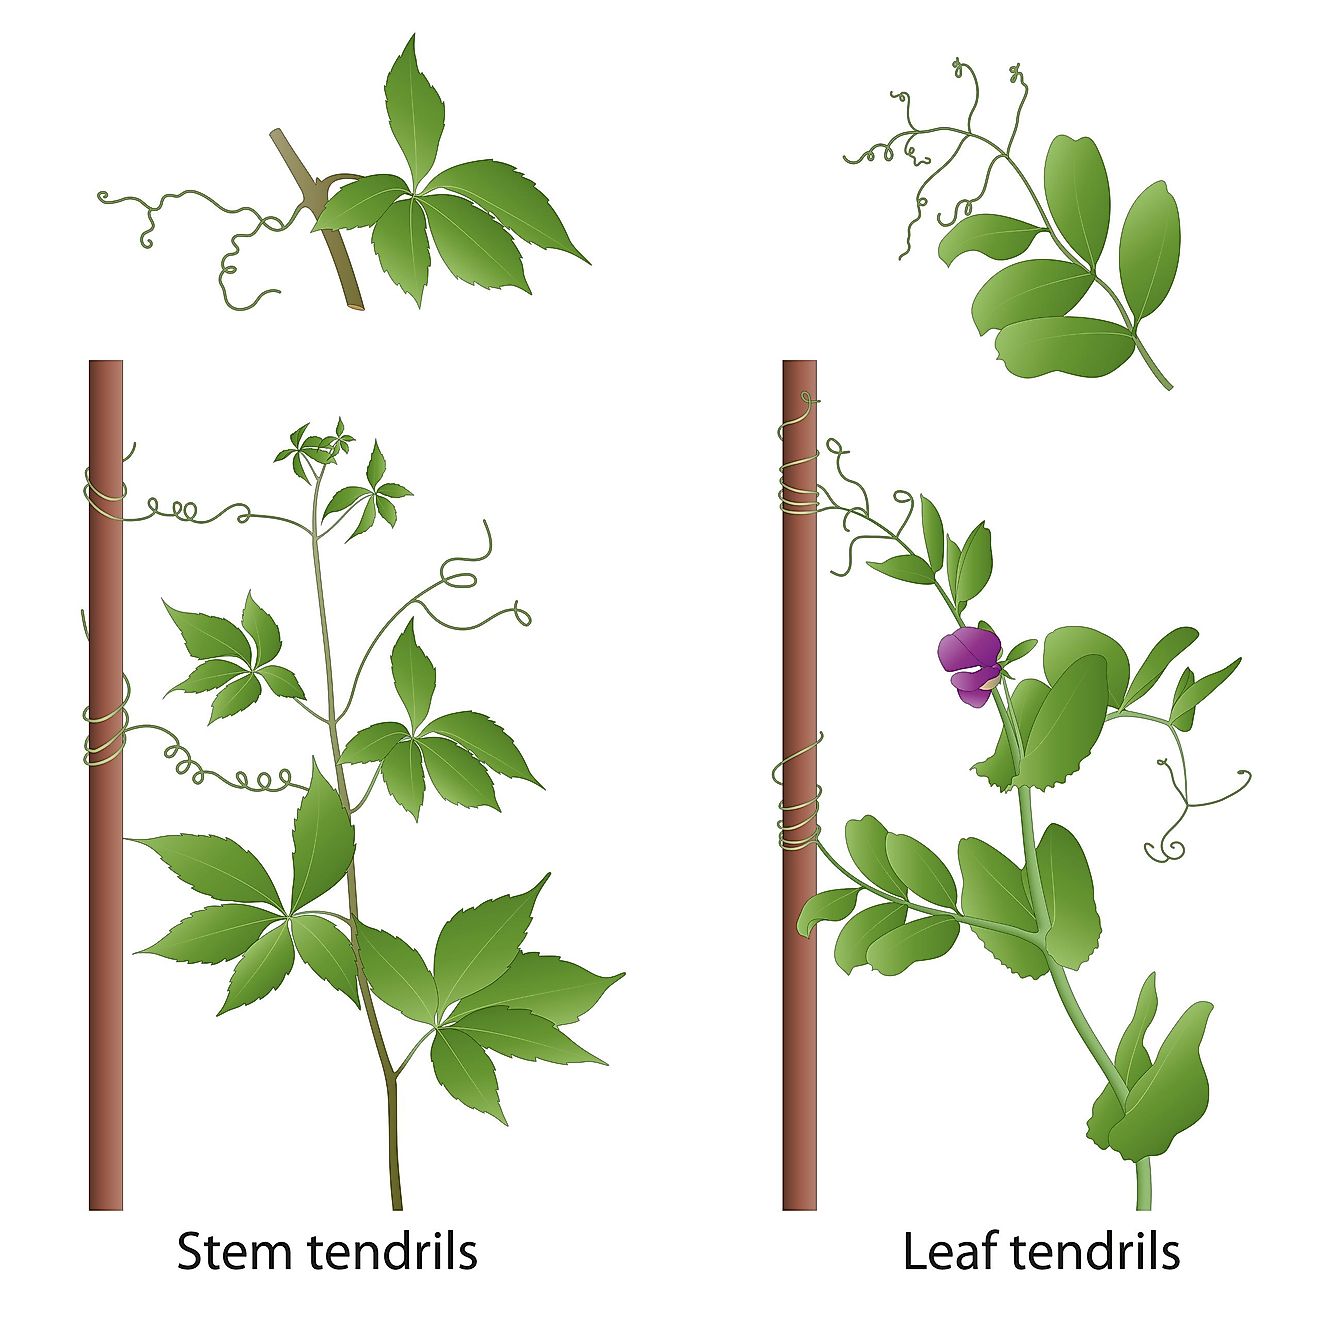 Tendrils help the plant to climb a support.